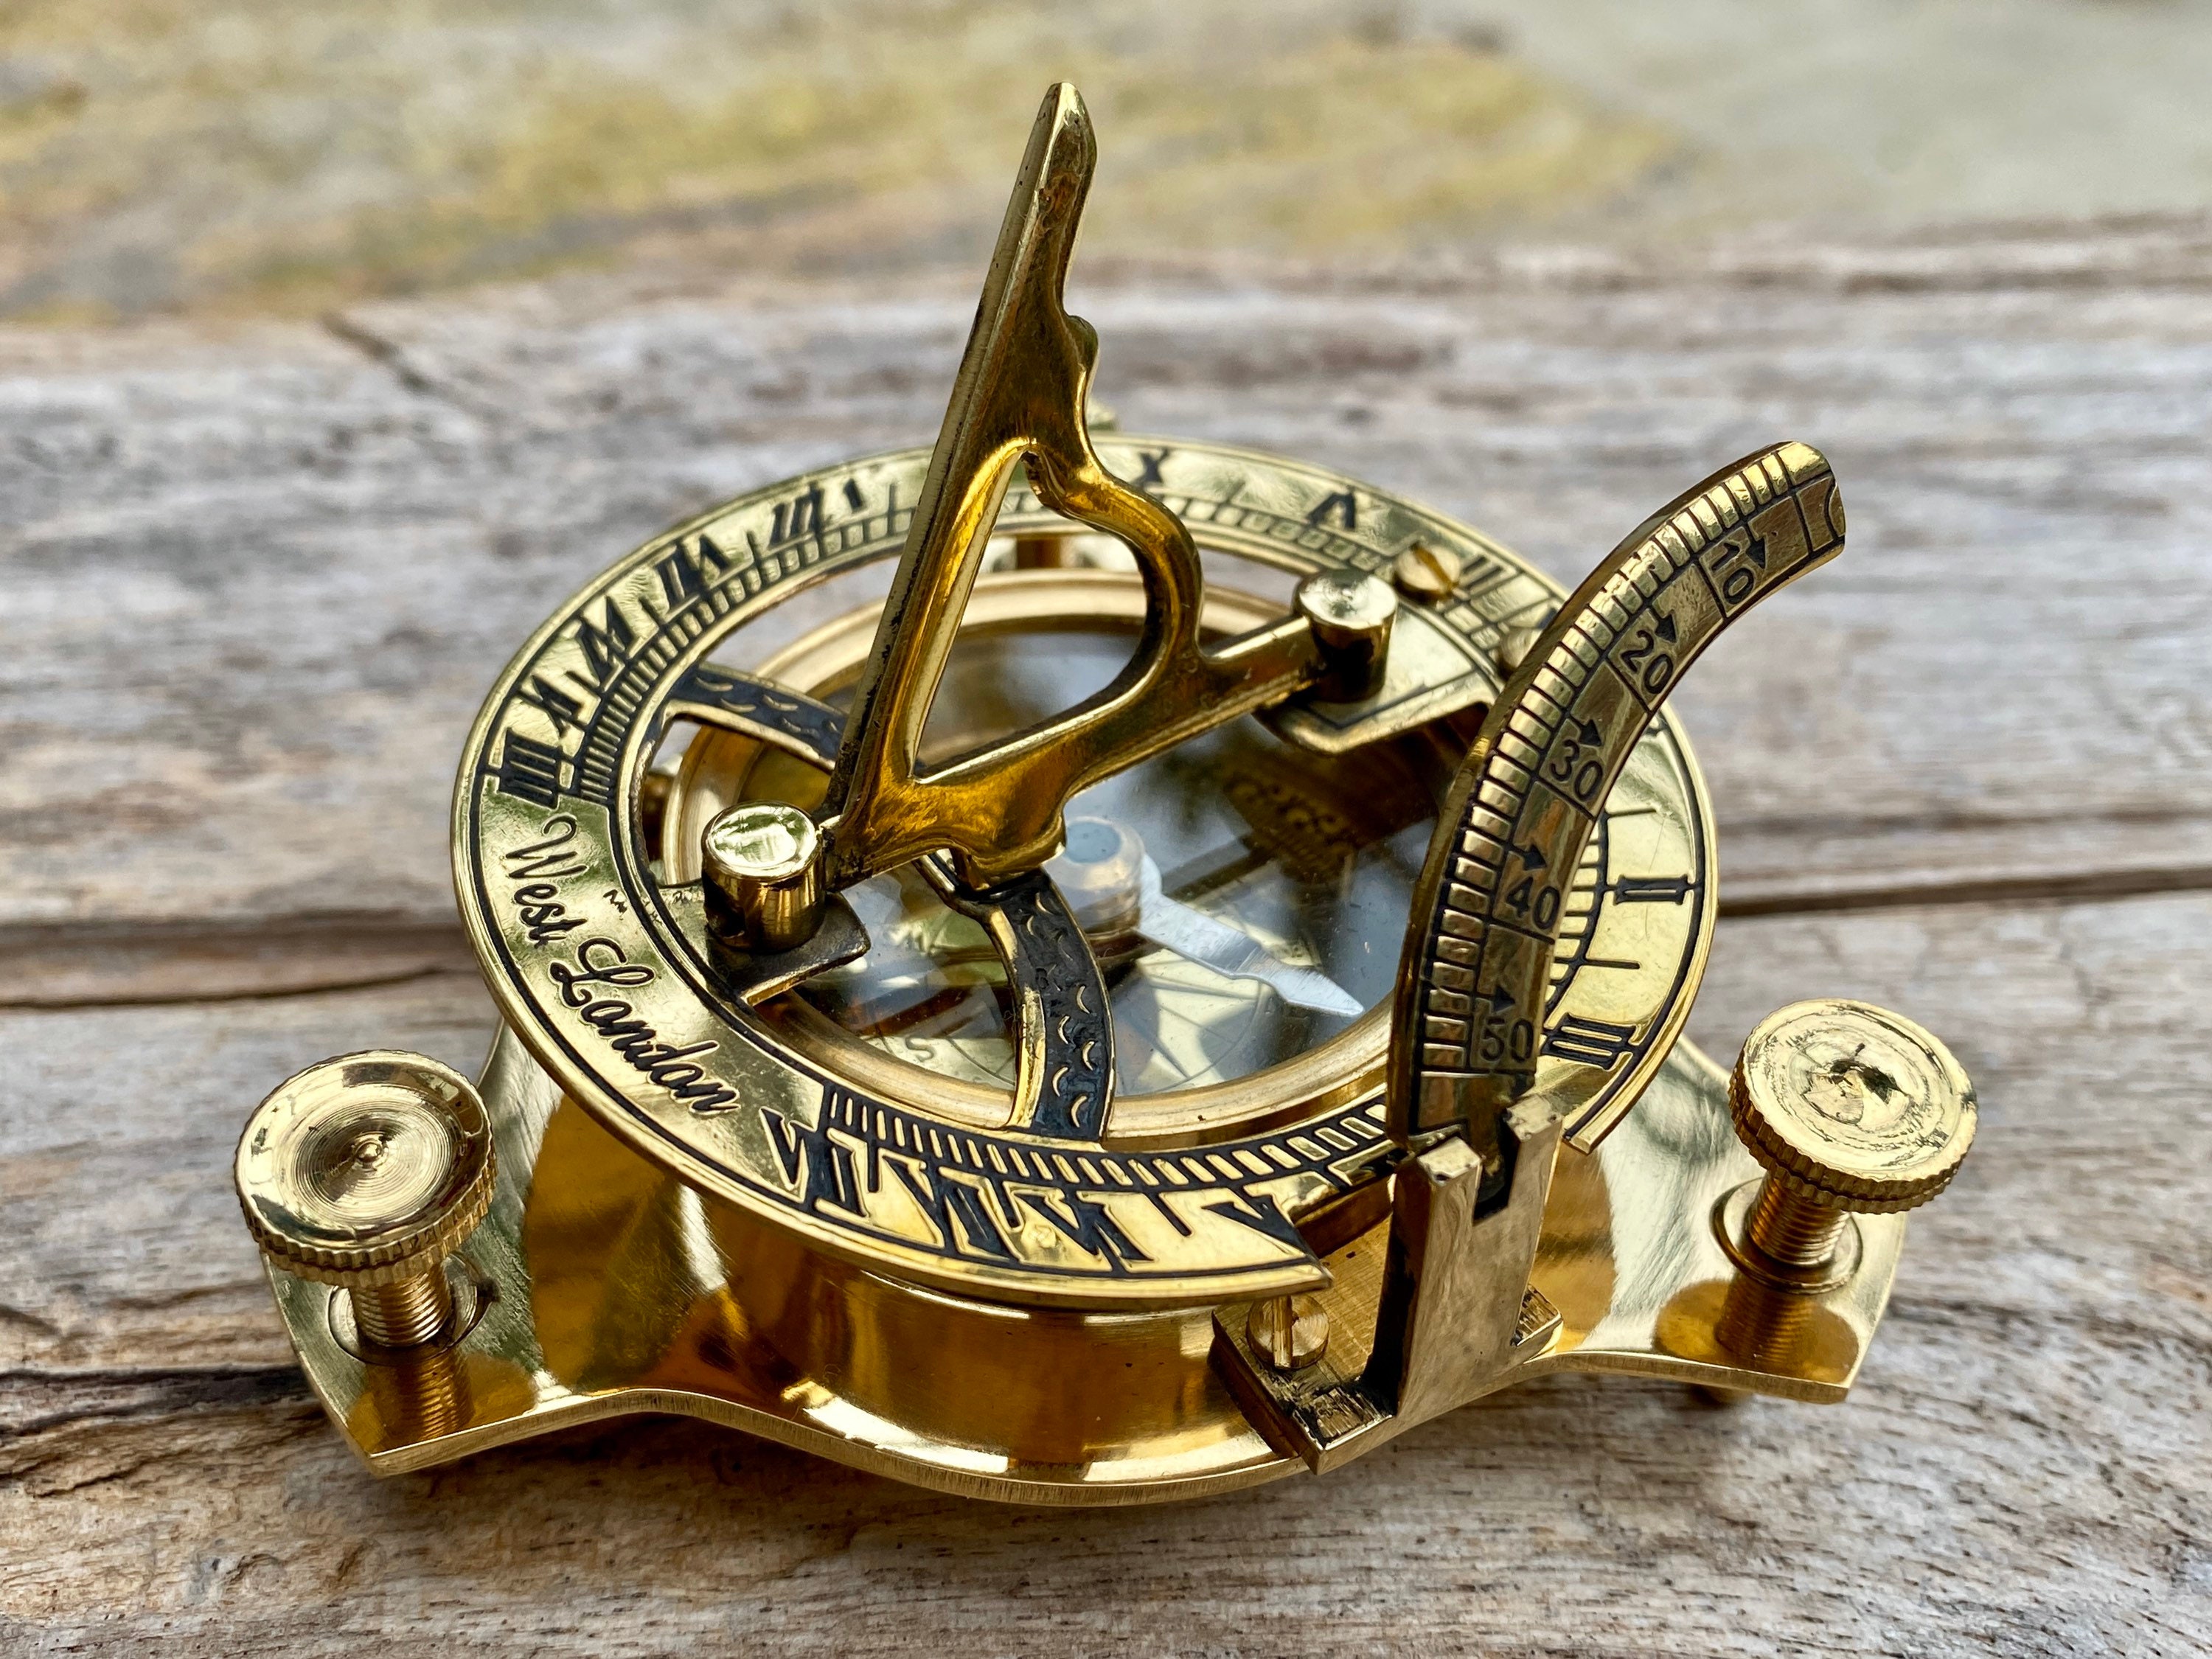 Nautical Antique Brass The Chess Maker 6th Century AD Compass With